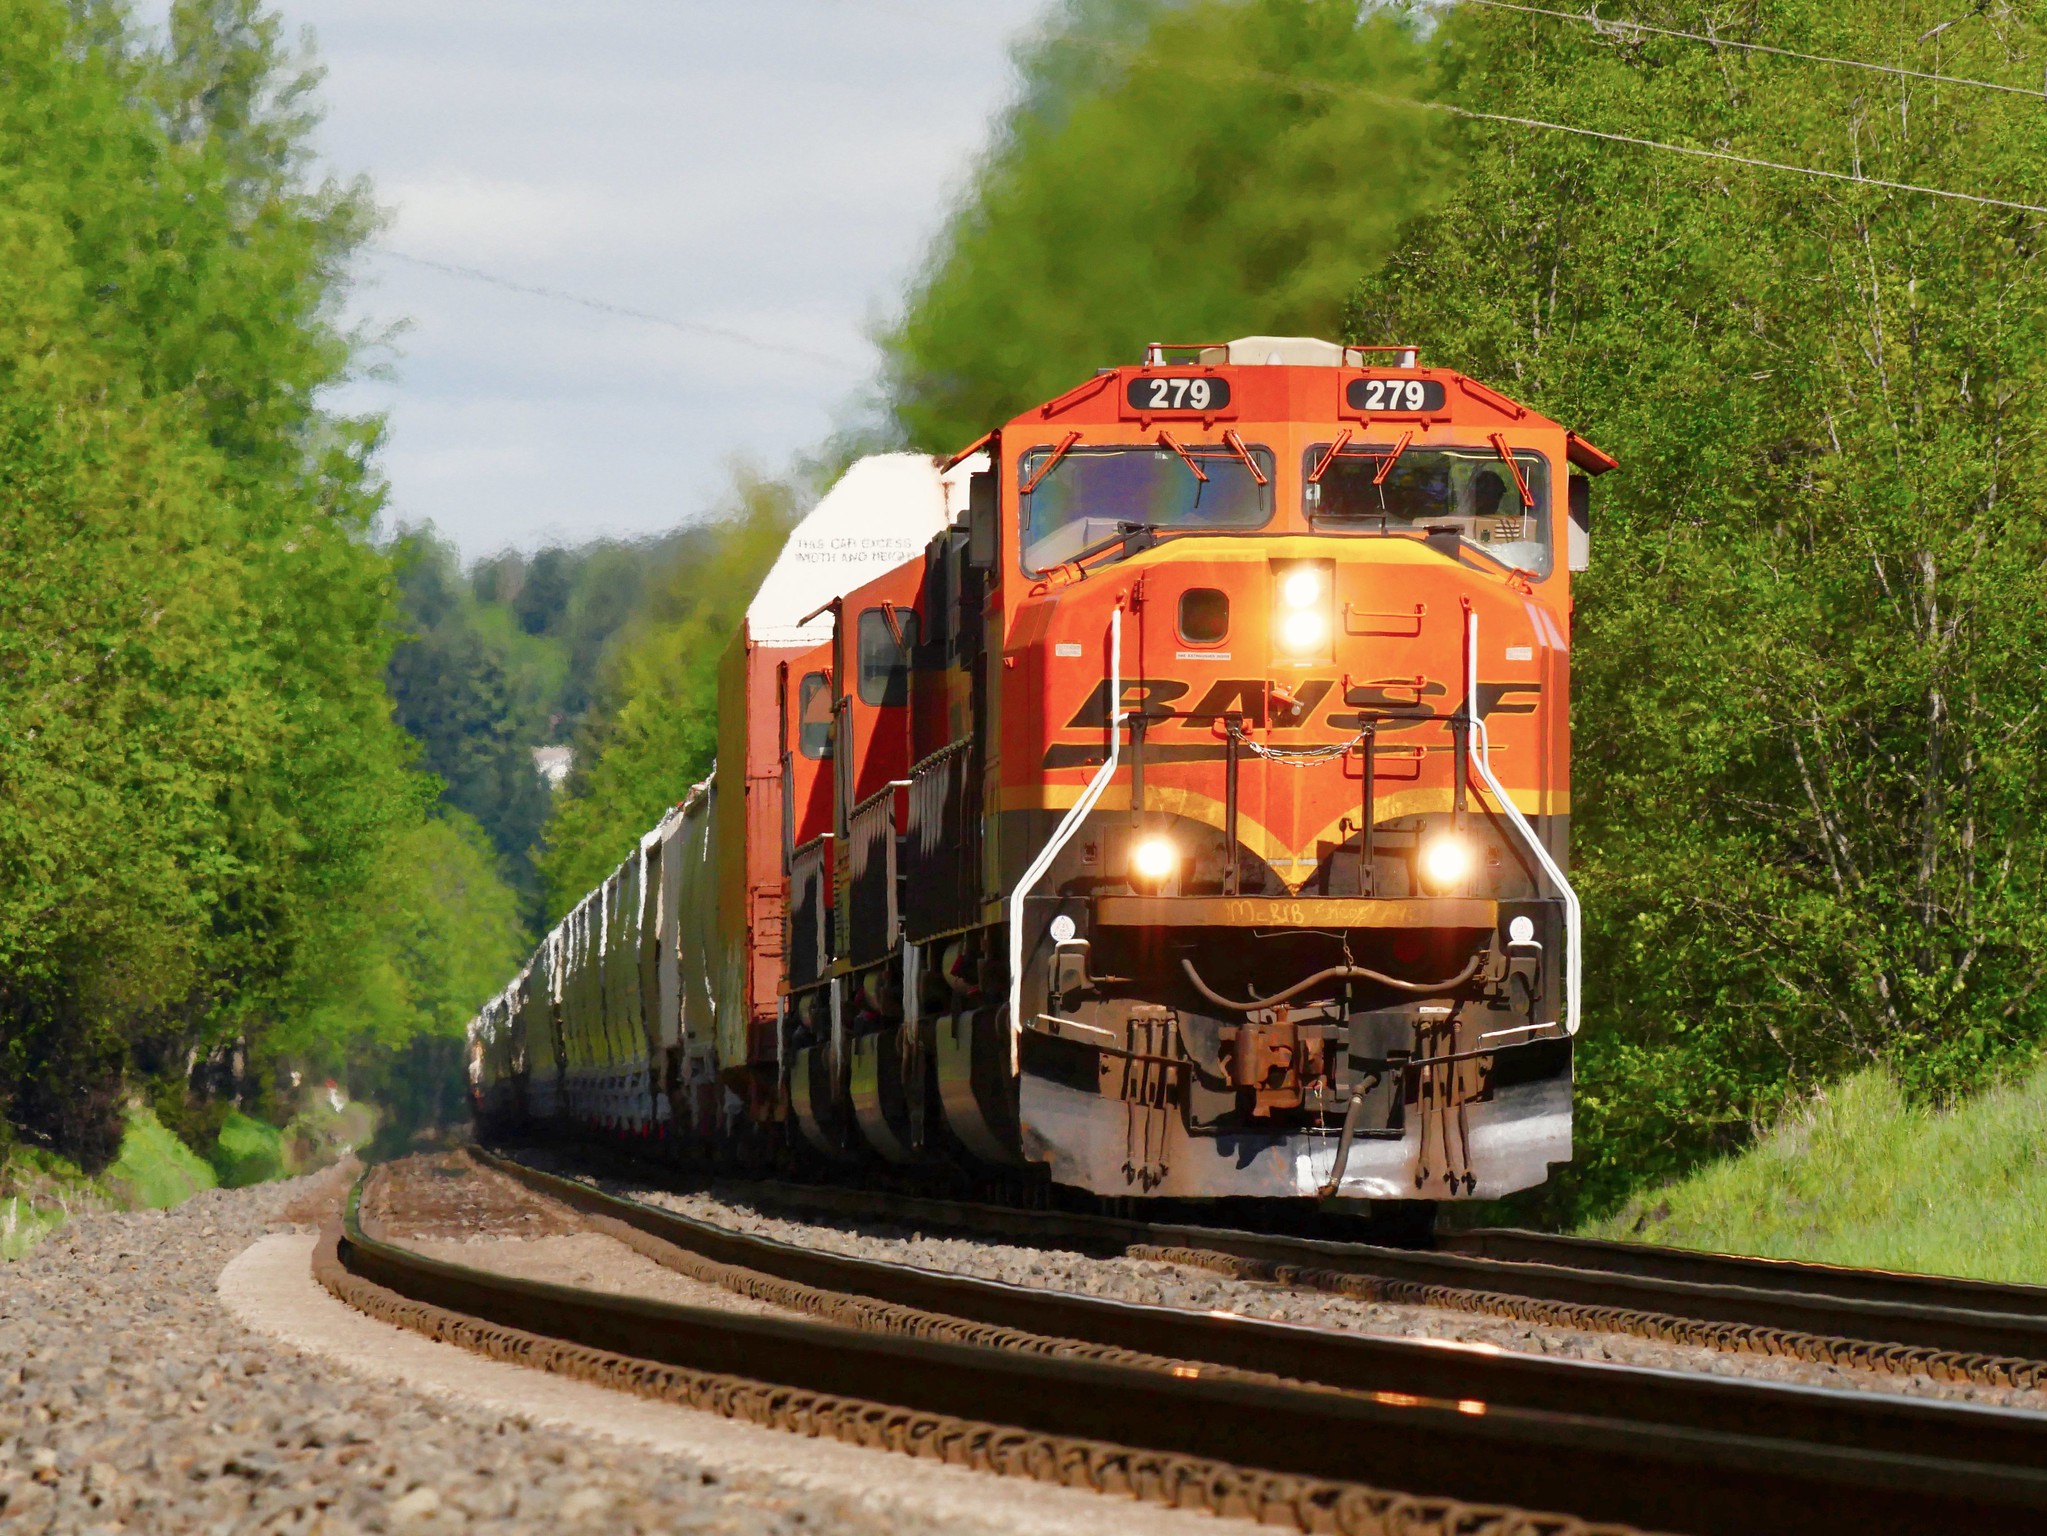 An orange and black locomotive pulling a freight train in a verdant scene.